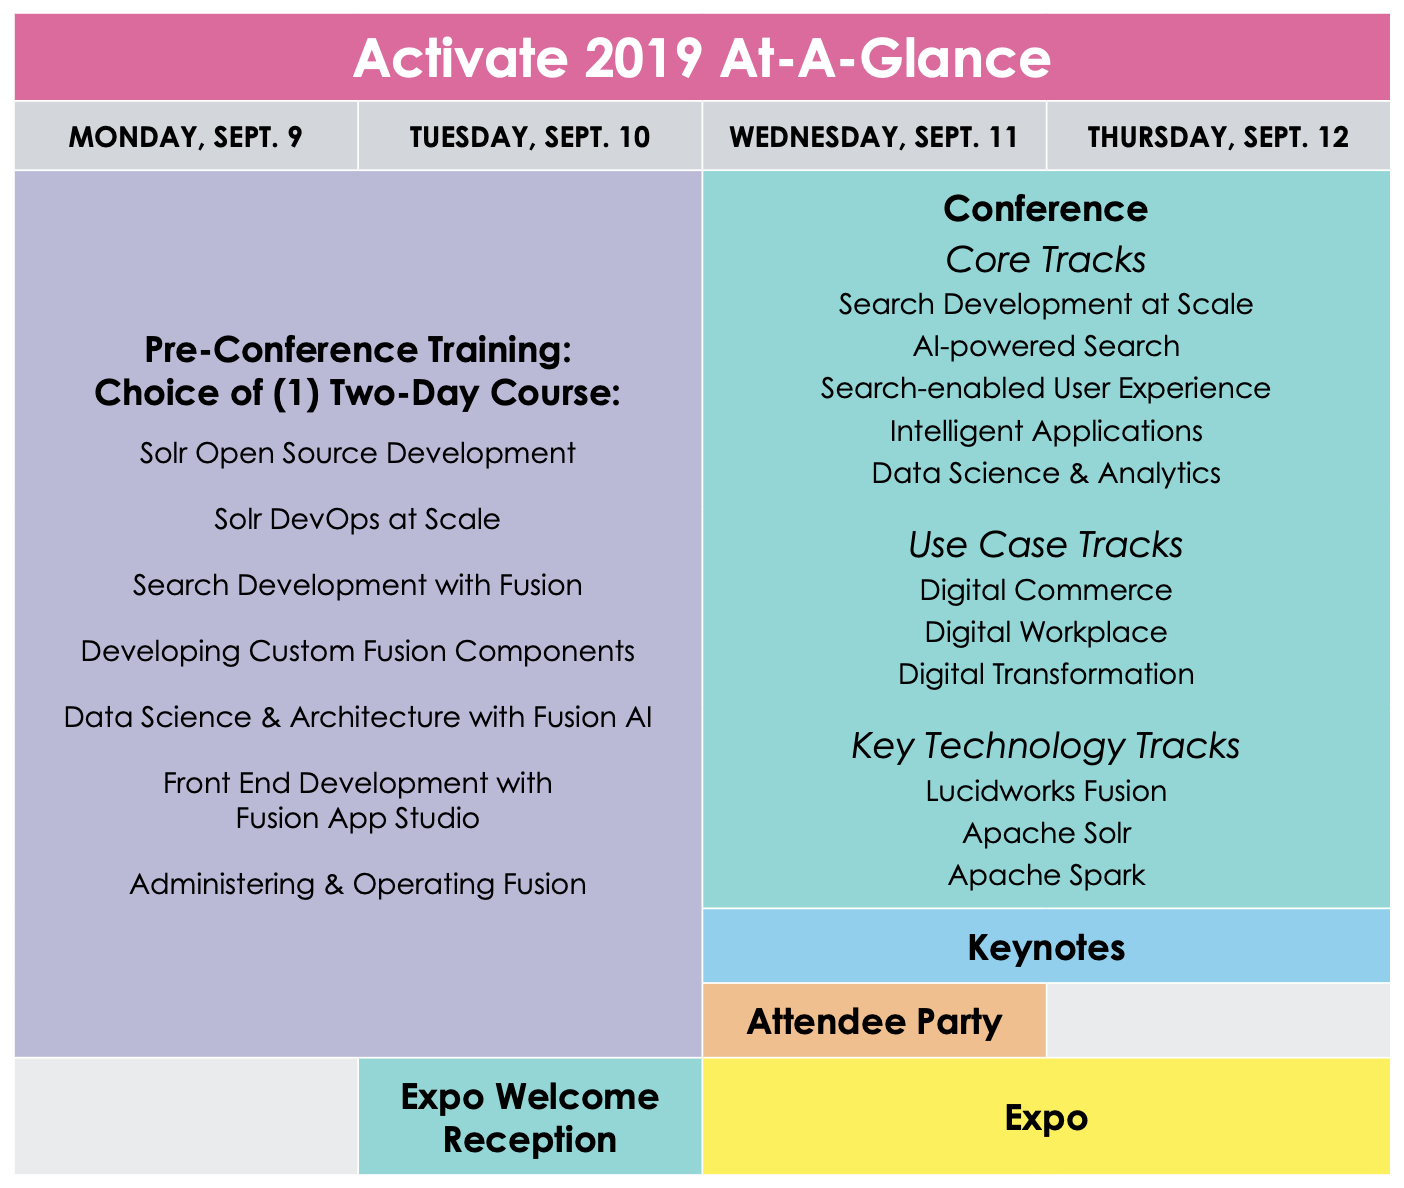 Activate 2019 At-A-Glance.png